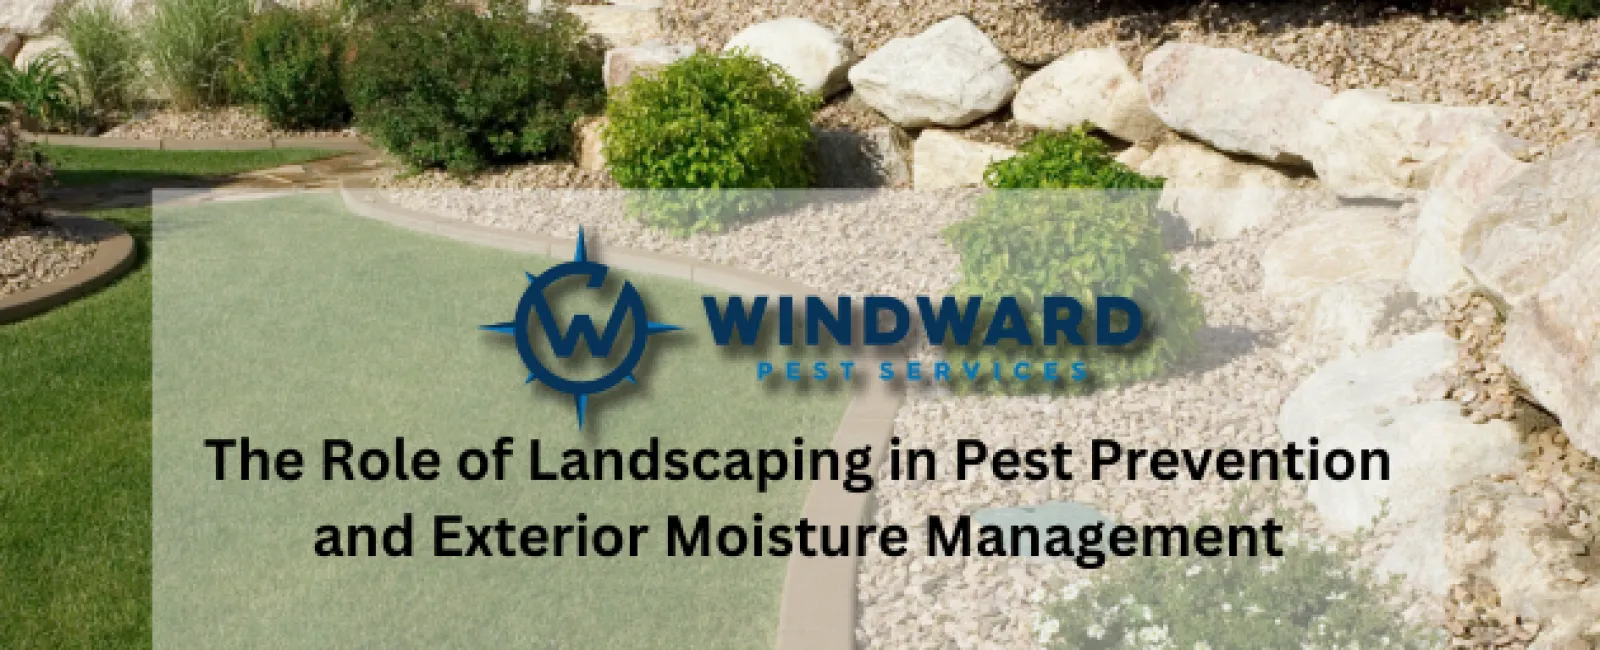 The Role of Landscaping in Pest Prevention and Exterior Moisture Management